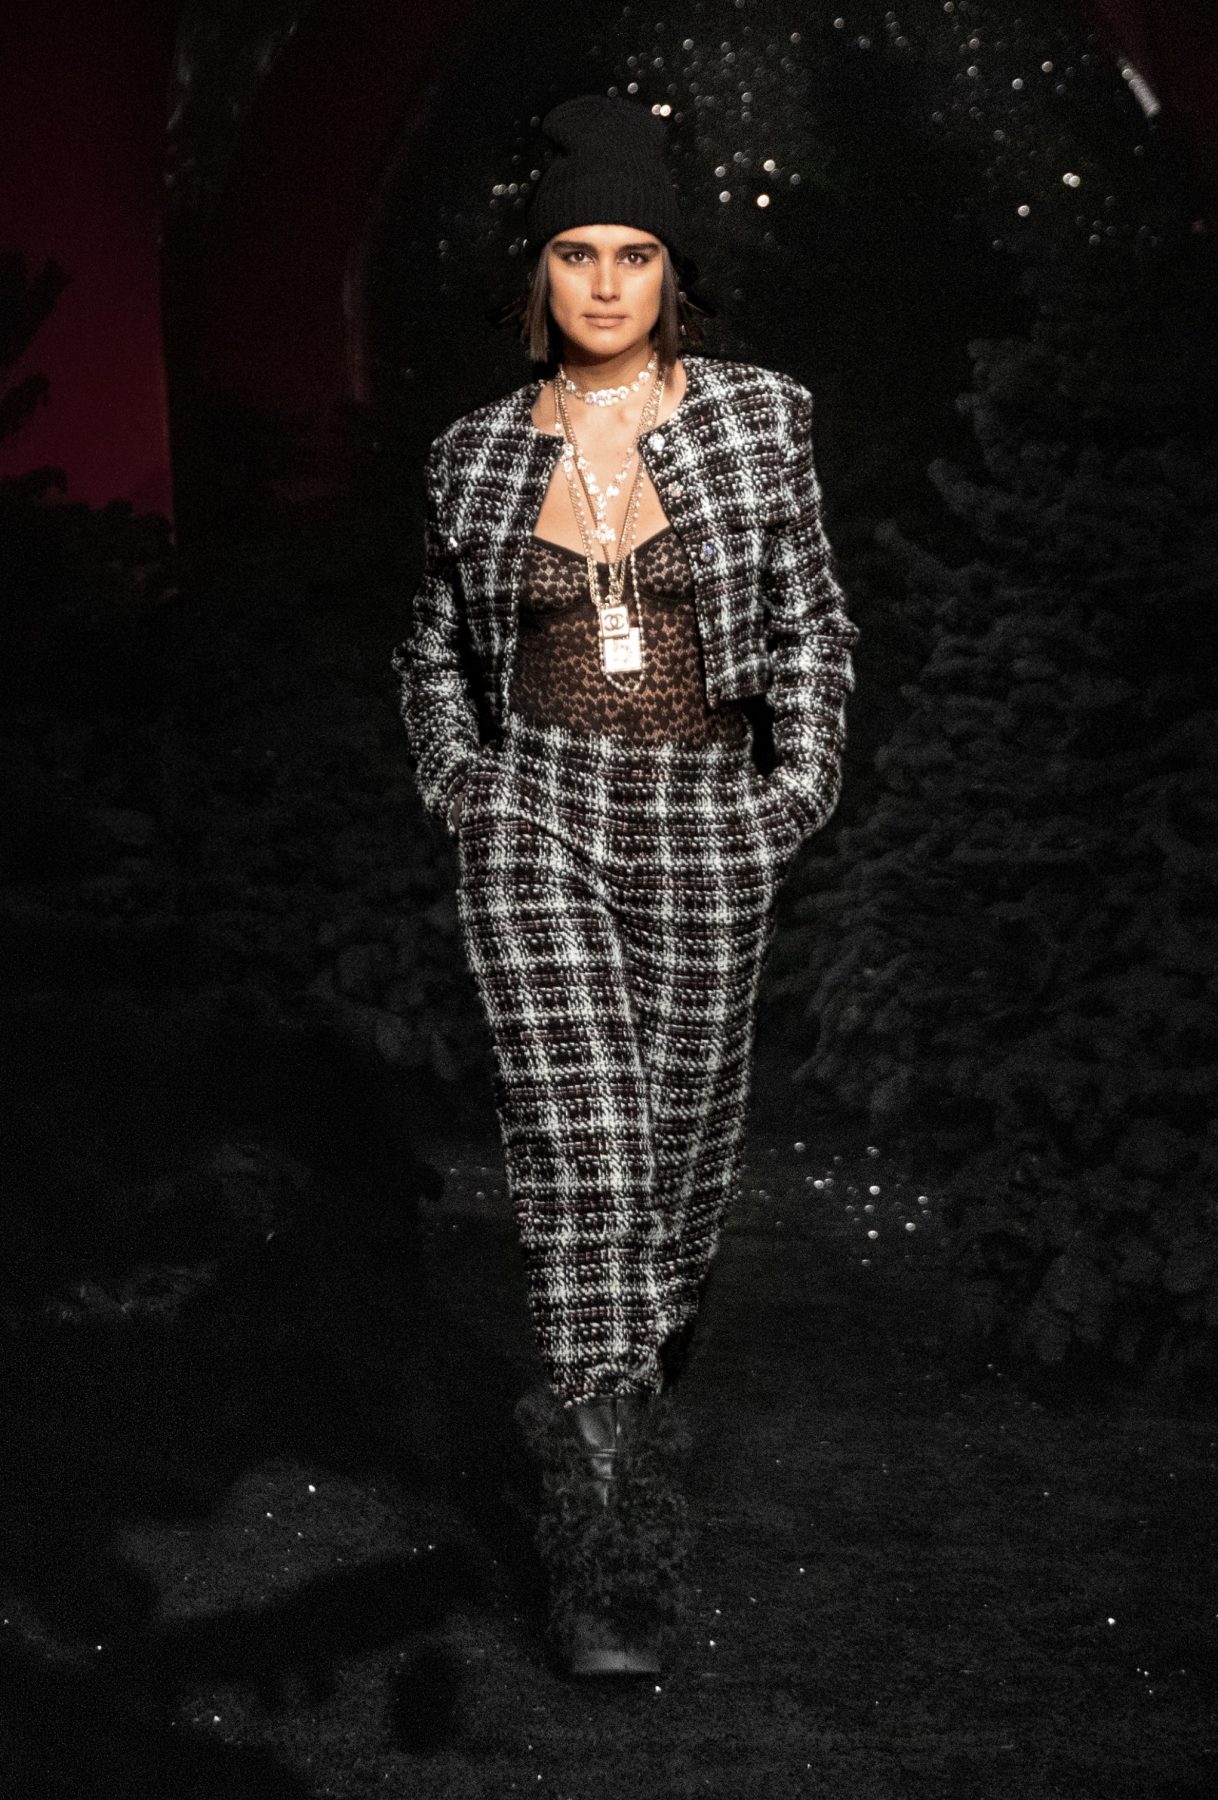 Culture and easy elegance grace Chanel's autumn/winter catwalk